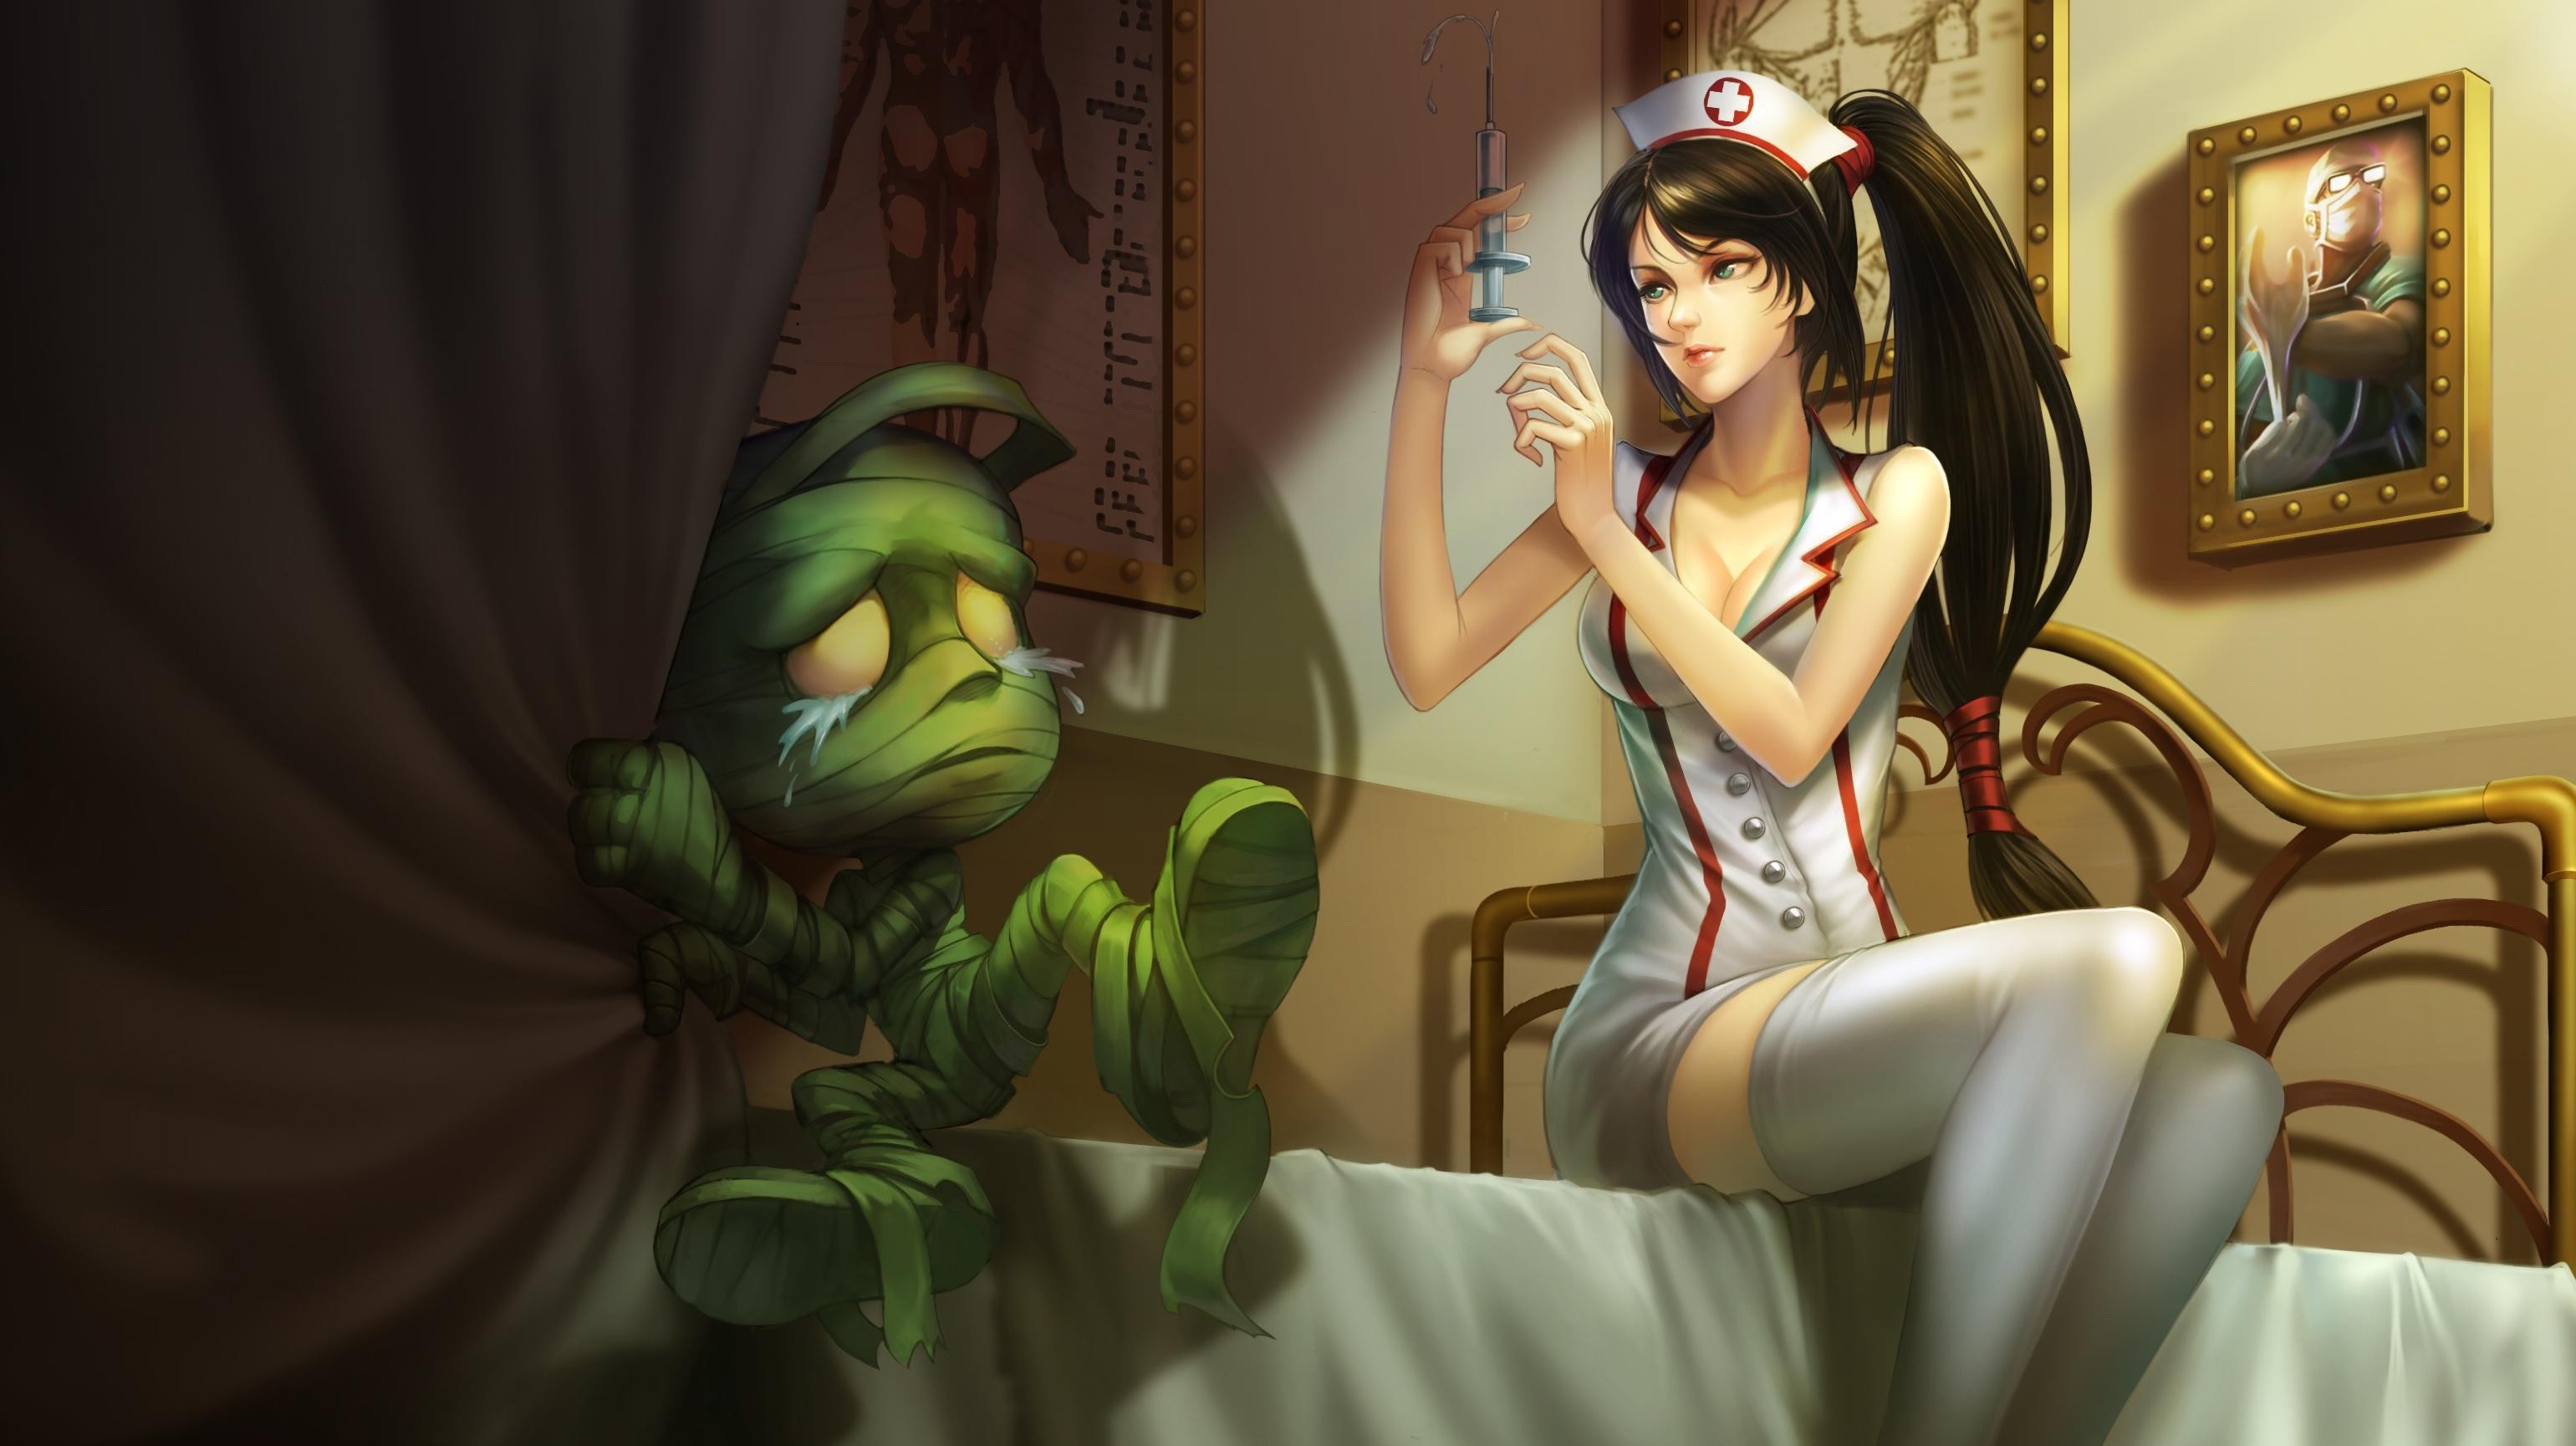 Anime 3081x1729 Akali (League of Legends) Amumu soft shading Amumu (League of Legends) video game art PC gaming League of Legends nurse outfit brunette syringe video game girls sitting stockings cleavage